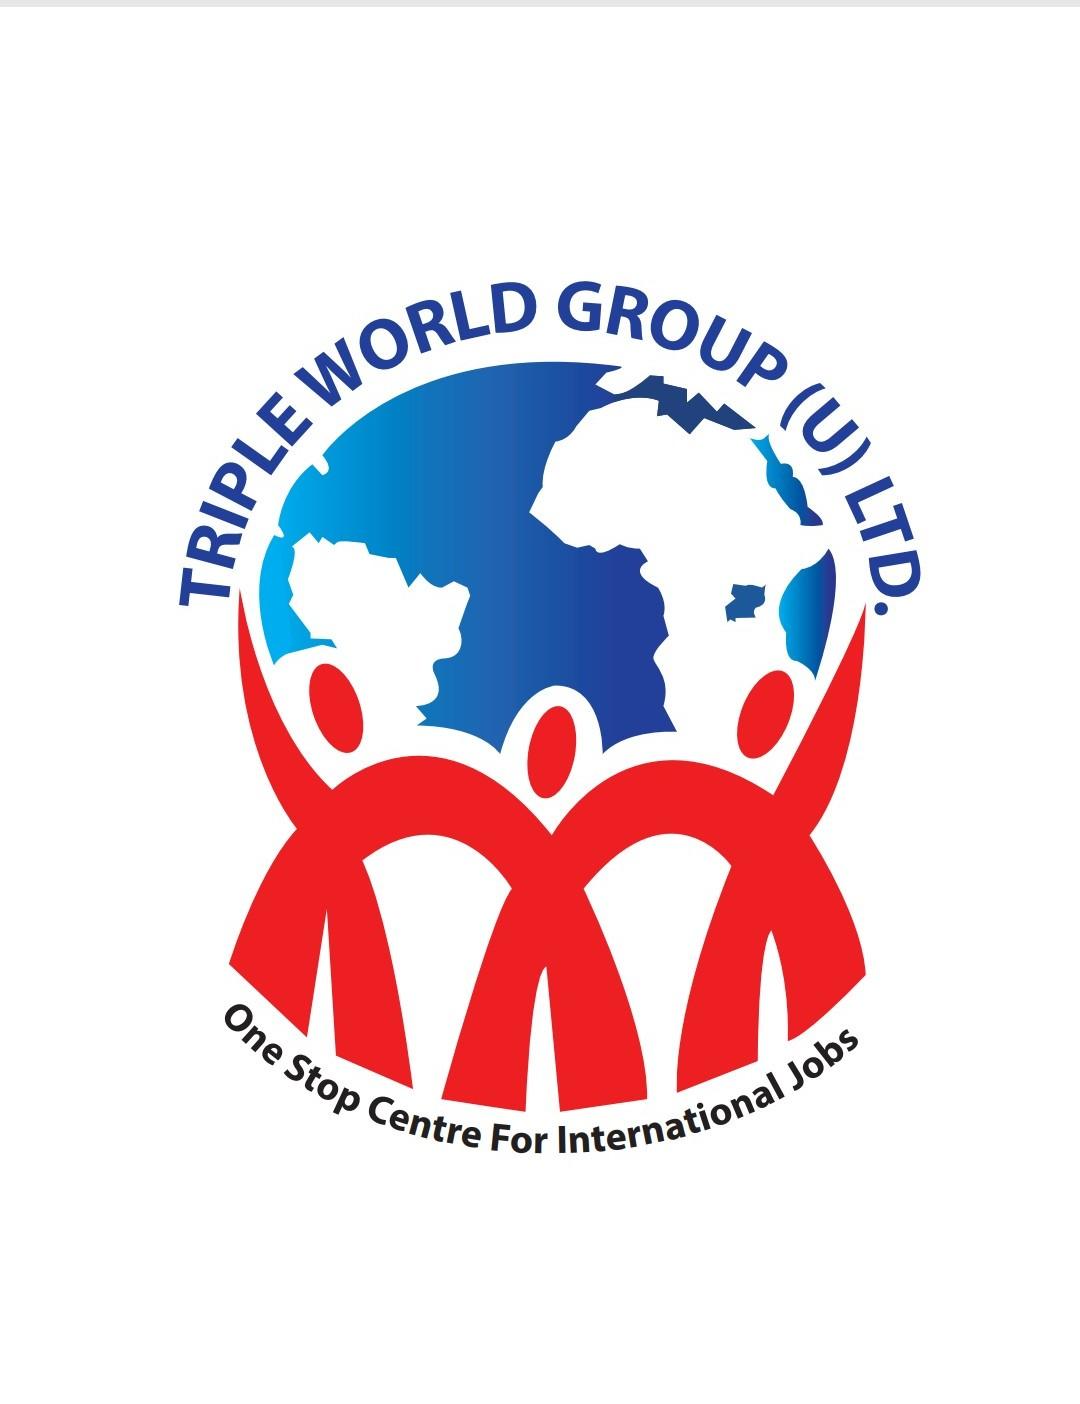 Triple World Group Limited